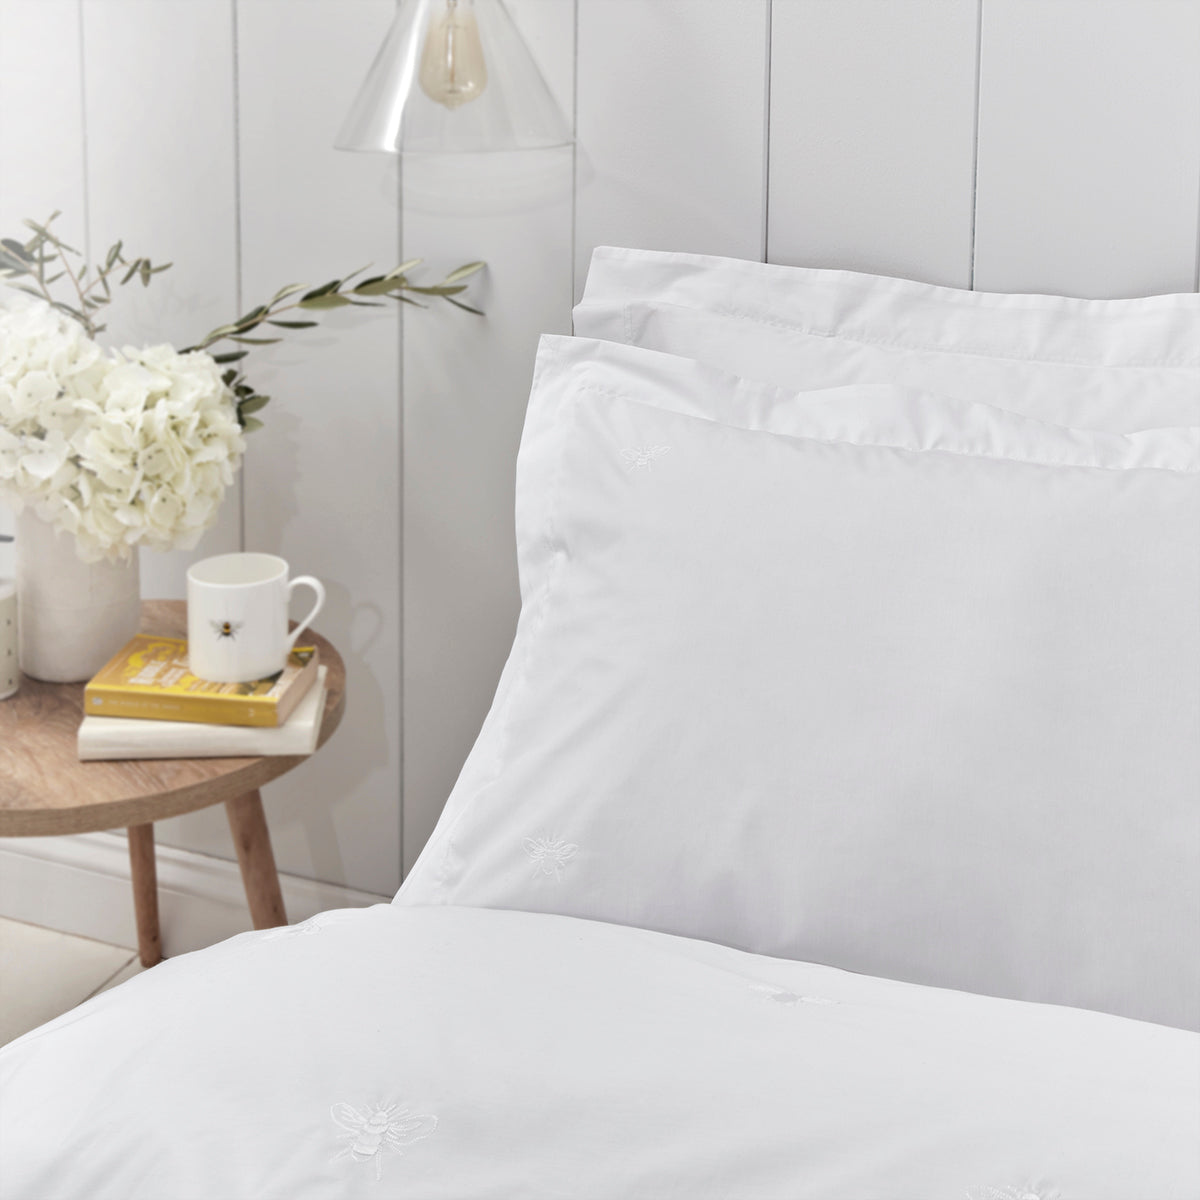 White pillowcases by Sophie Allport with embroidered bee detailing